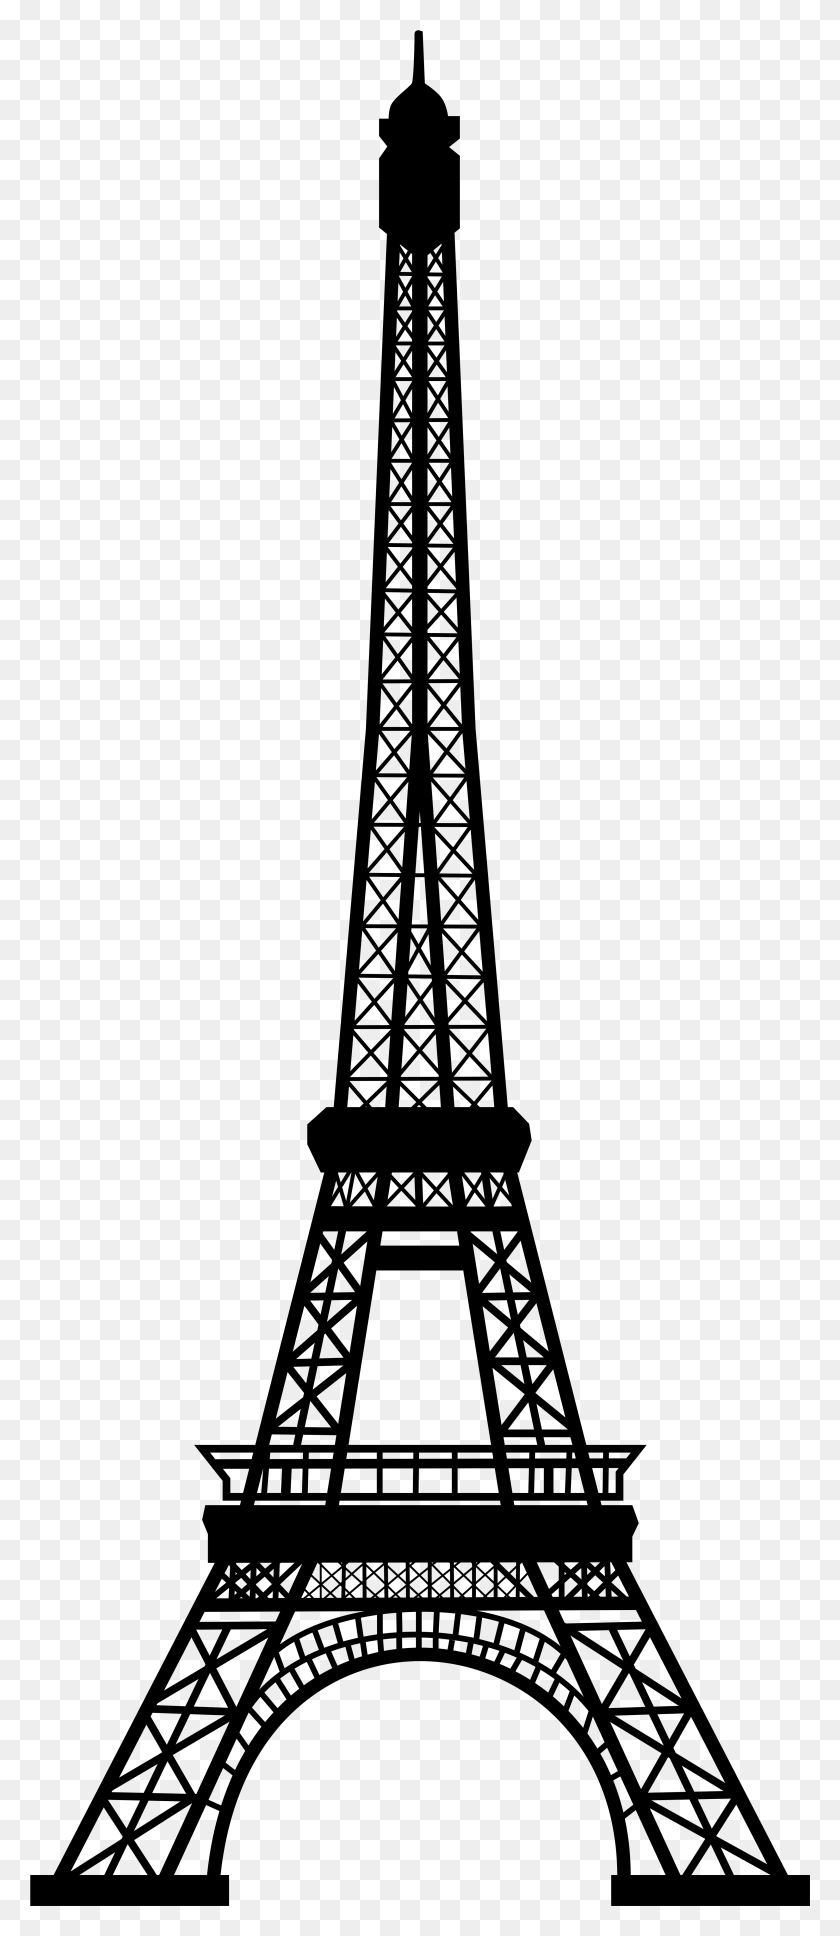 3246x7809 Transparent Eiffel Tower Silhouette Clip Art Image Eiffel Tower Clipart Transparent Background, Gray, World Of Warcraft HD PNG Download